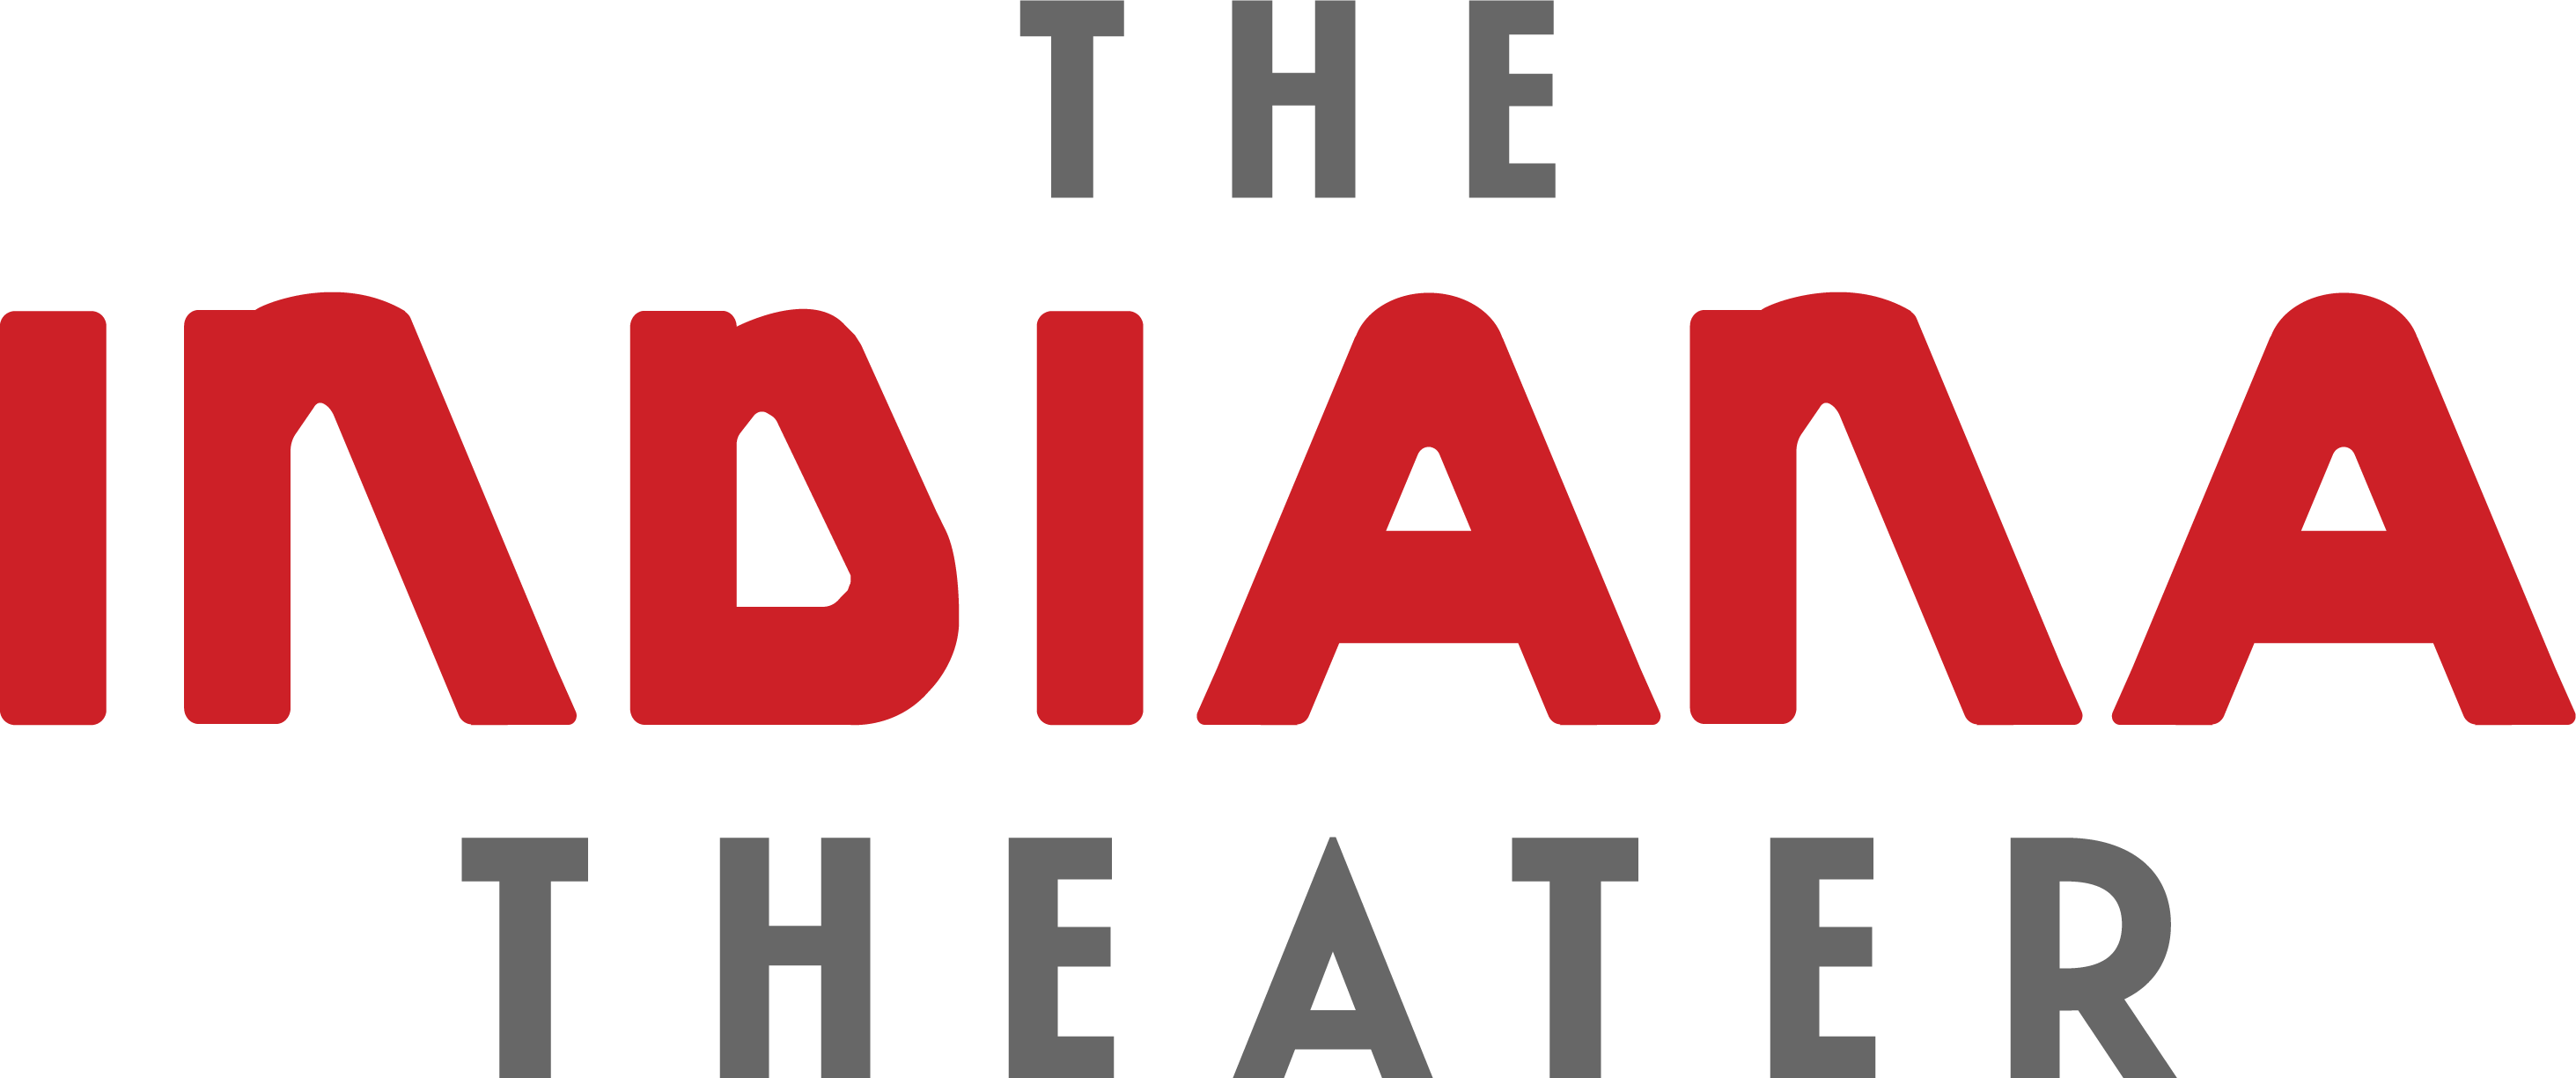 The Indiana Theater